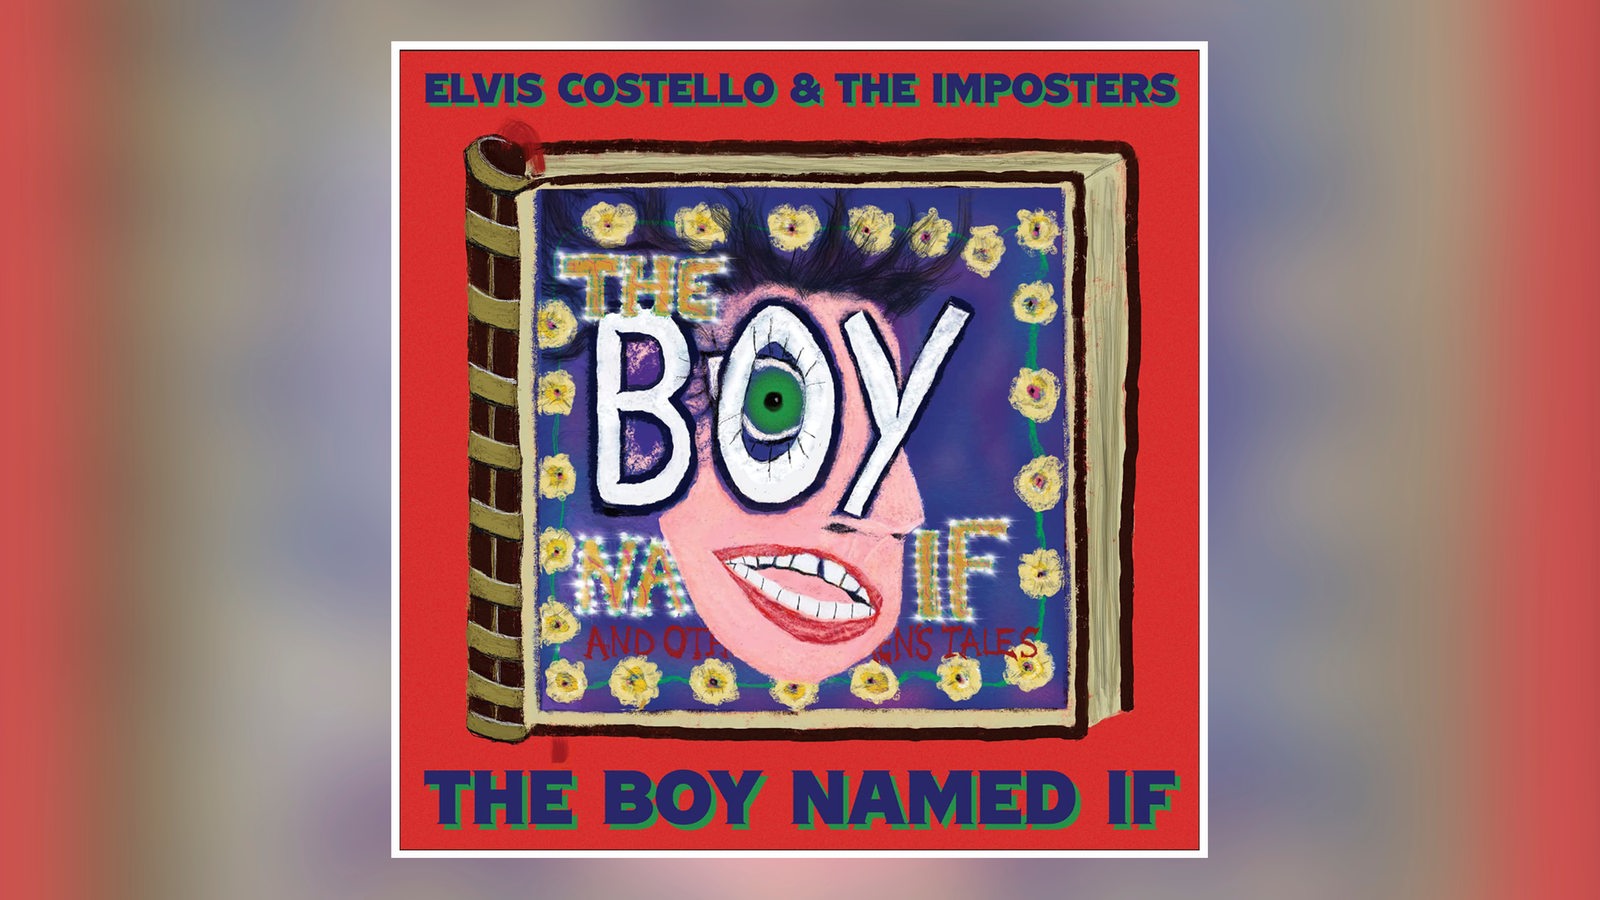 Elvis Costello & The Imposters "The Boy Named If"